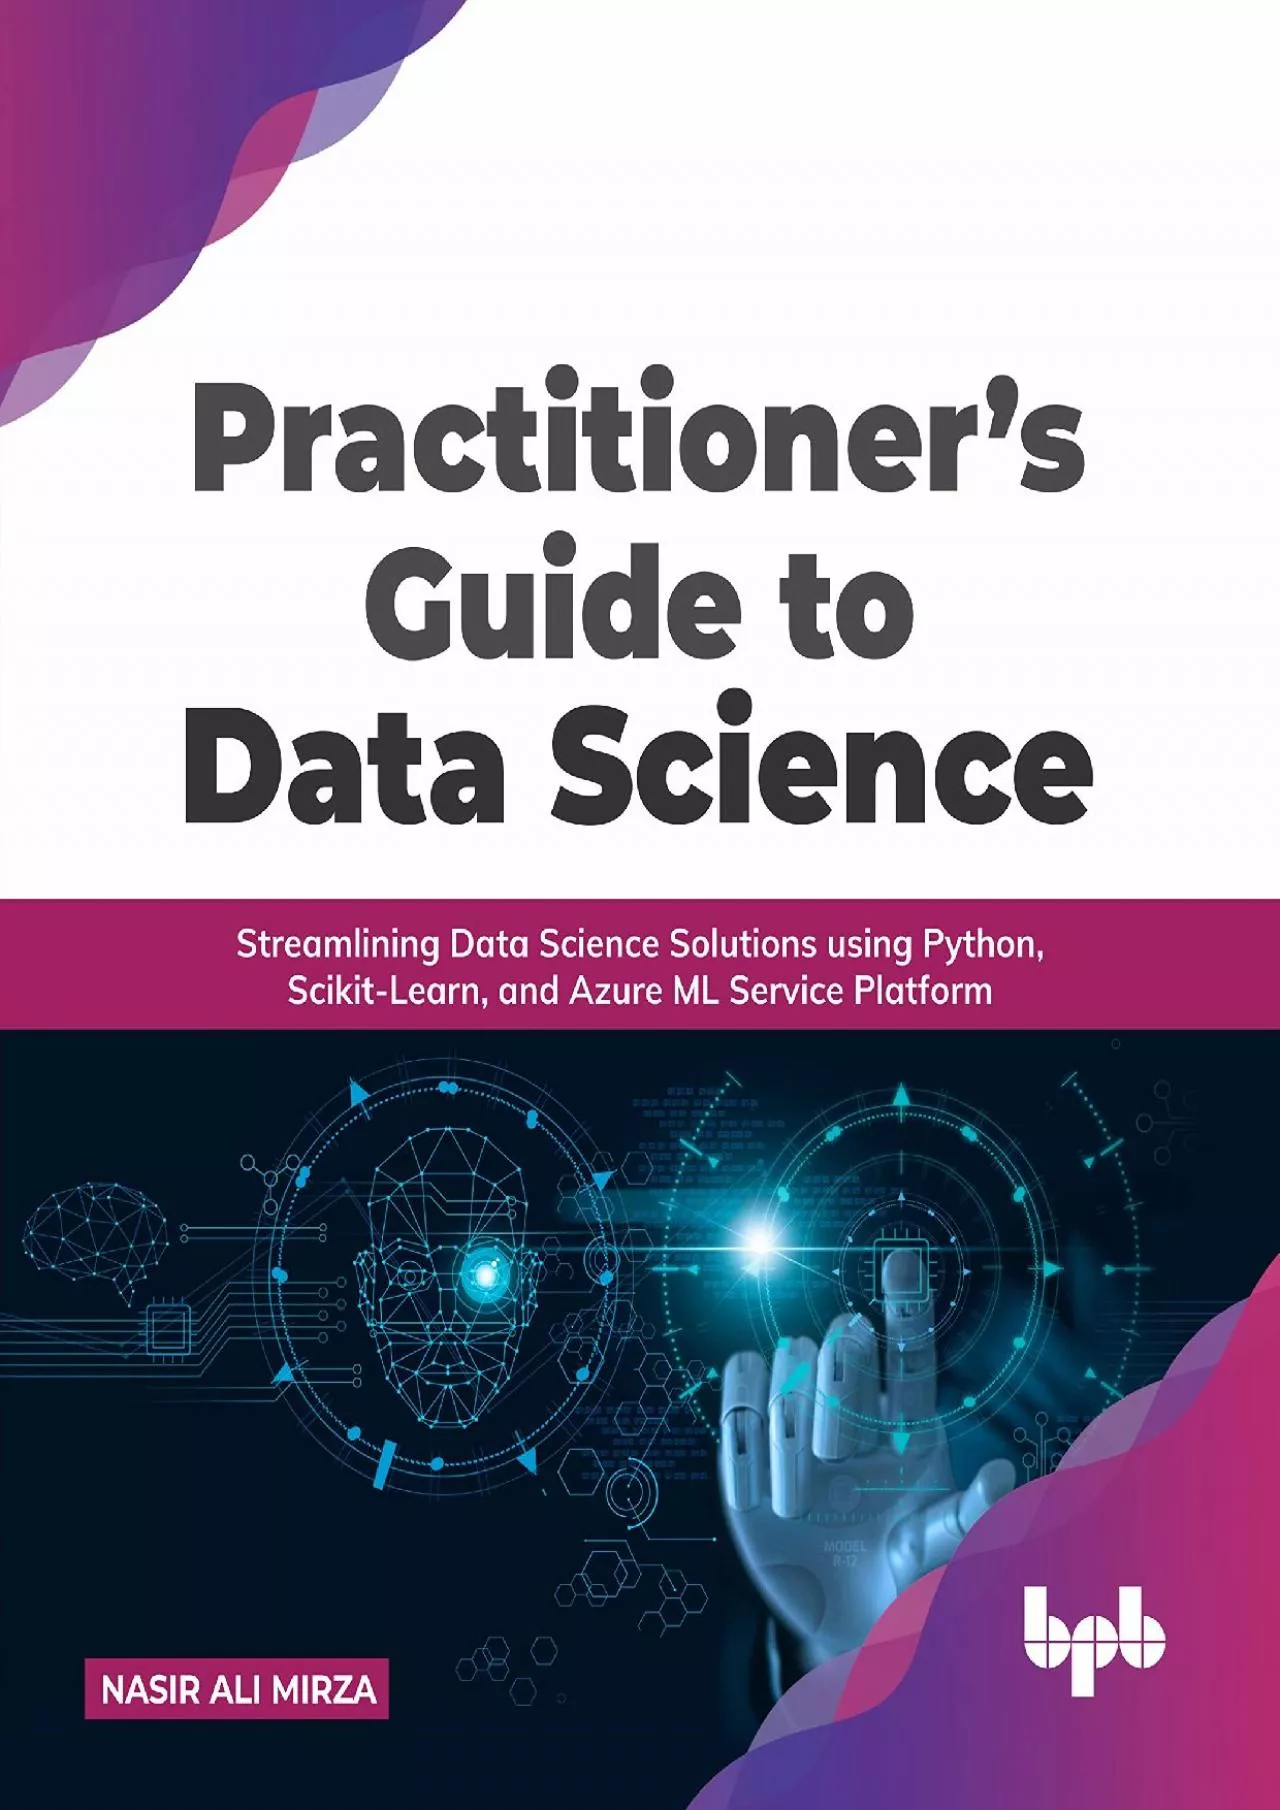 [BEST]-Practitioner’s Guide to Data Science Streamlining Data Science Solutions using